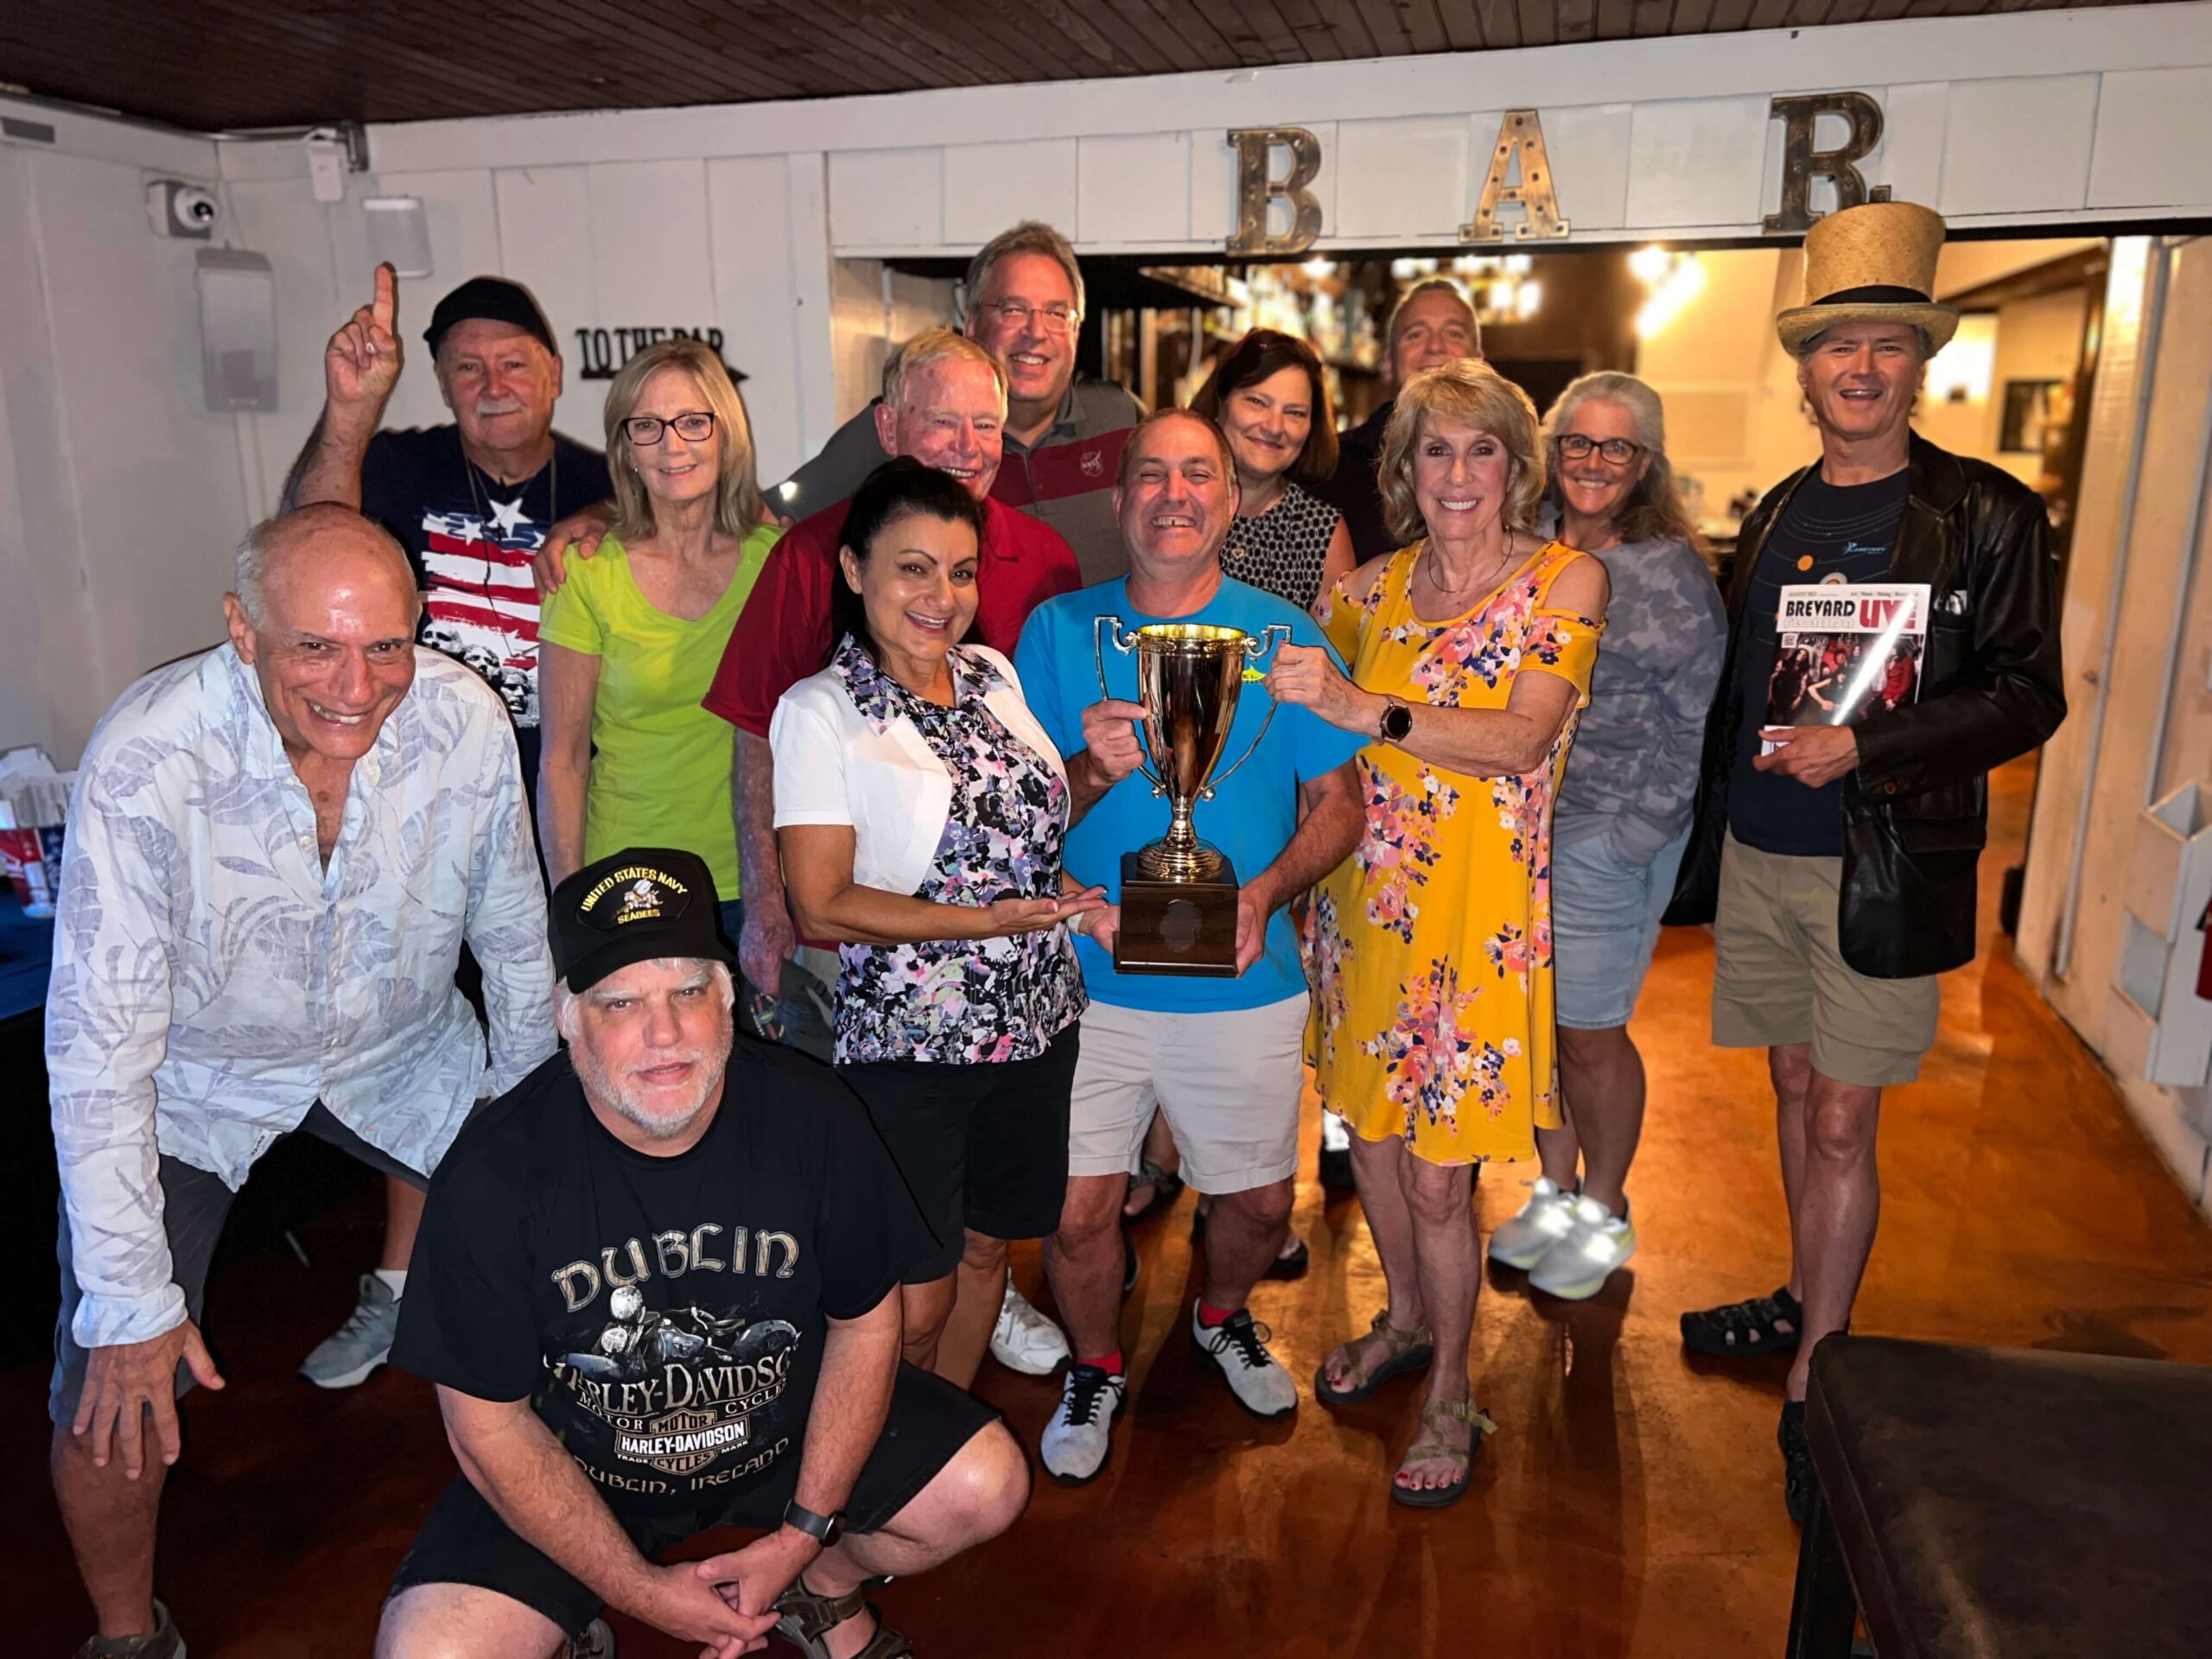 Pineda Inn Bar & Grill Rockledge FL 32955 trivia night: large group of adults smiling and gathered around a trophy in front of a sign that says "BAR" and with one man wearing a top hat